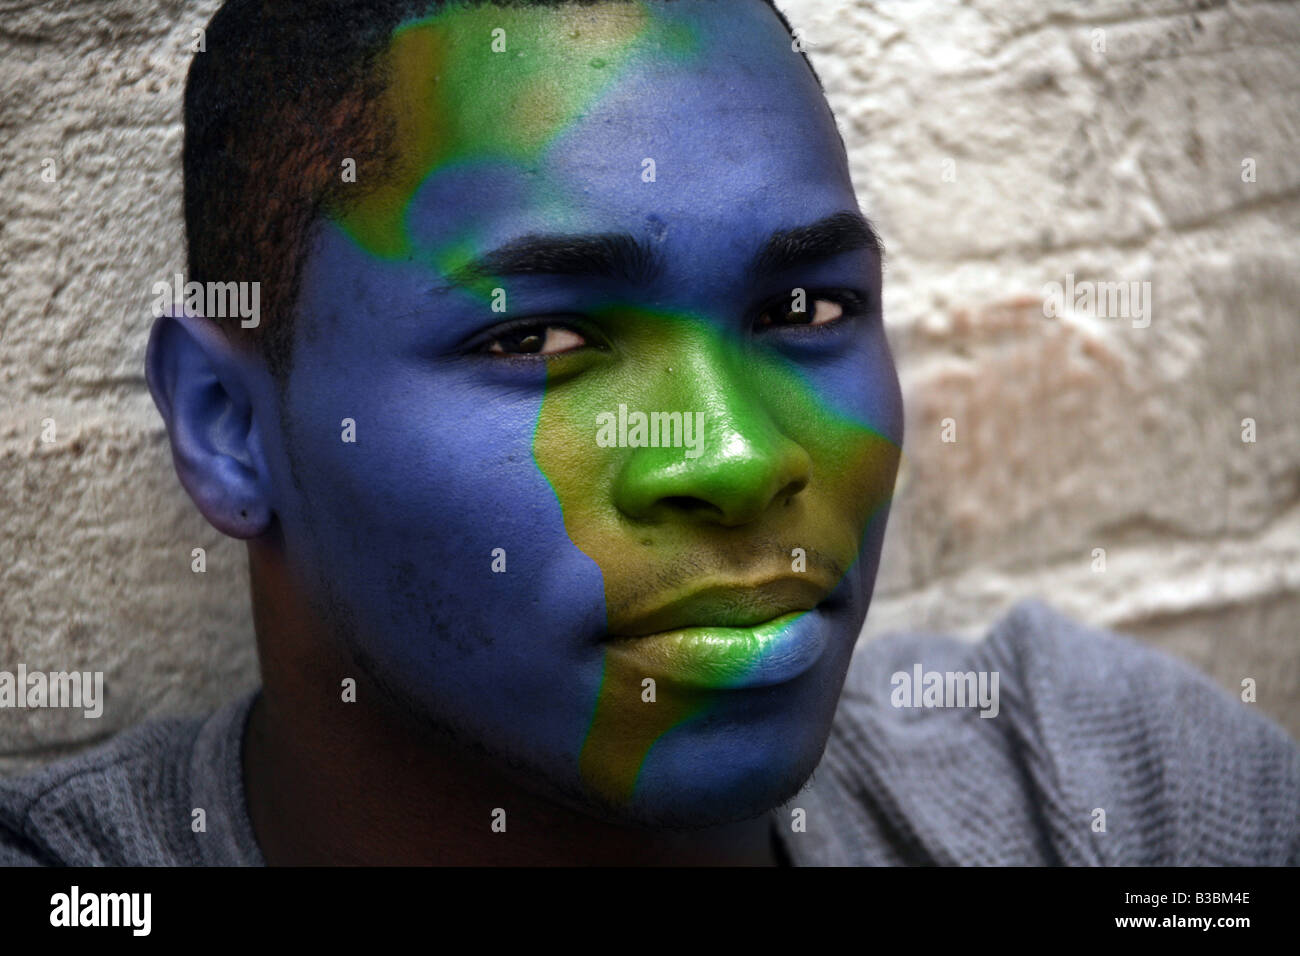 African American Male Portrait With Globe Painted on His Face Conceptual Montage Image Stock Photo